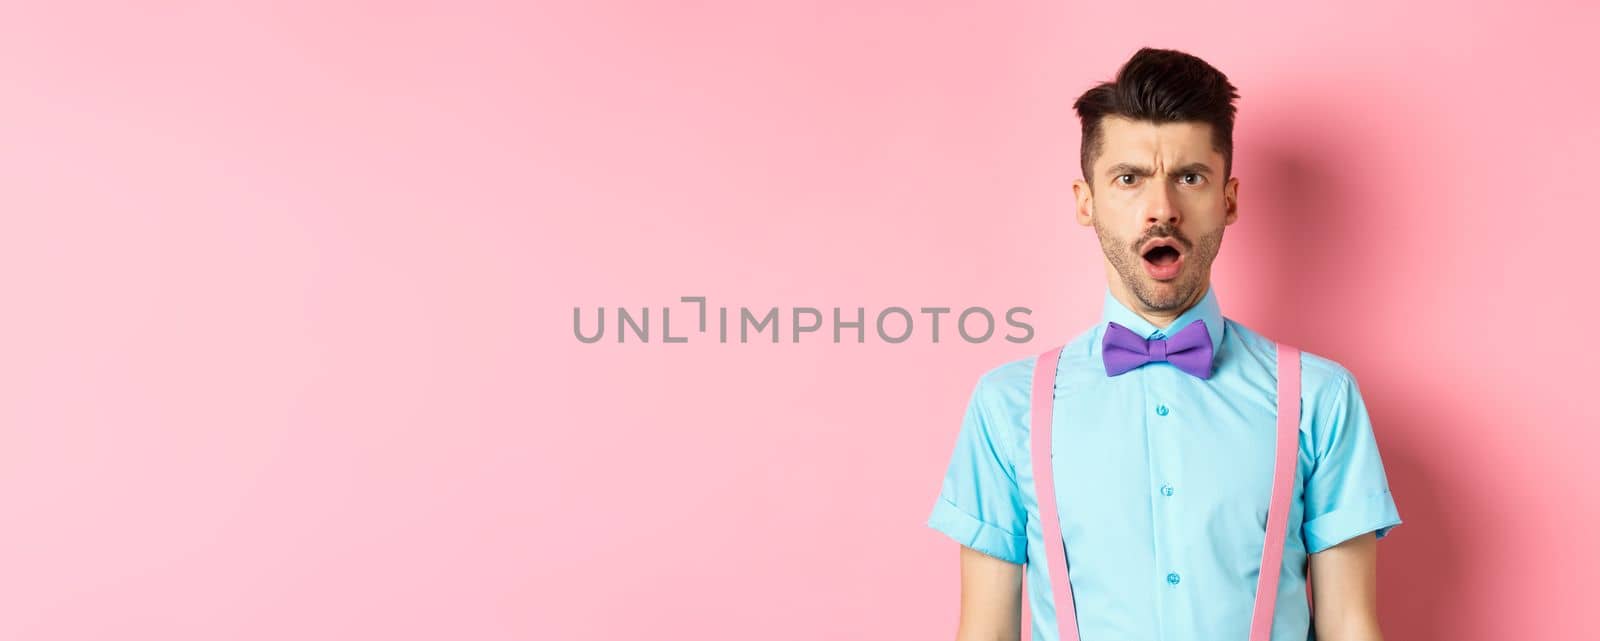 Shocked and offended young man frowning, looking at someone rude, standing insulted on pink background by Benzoix